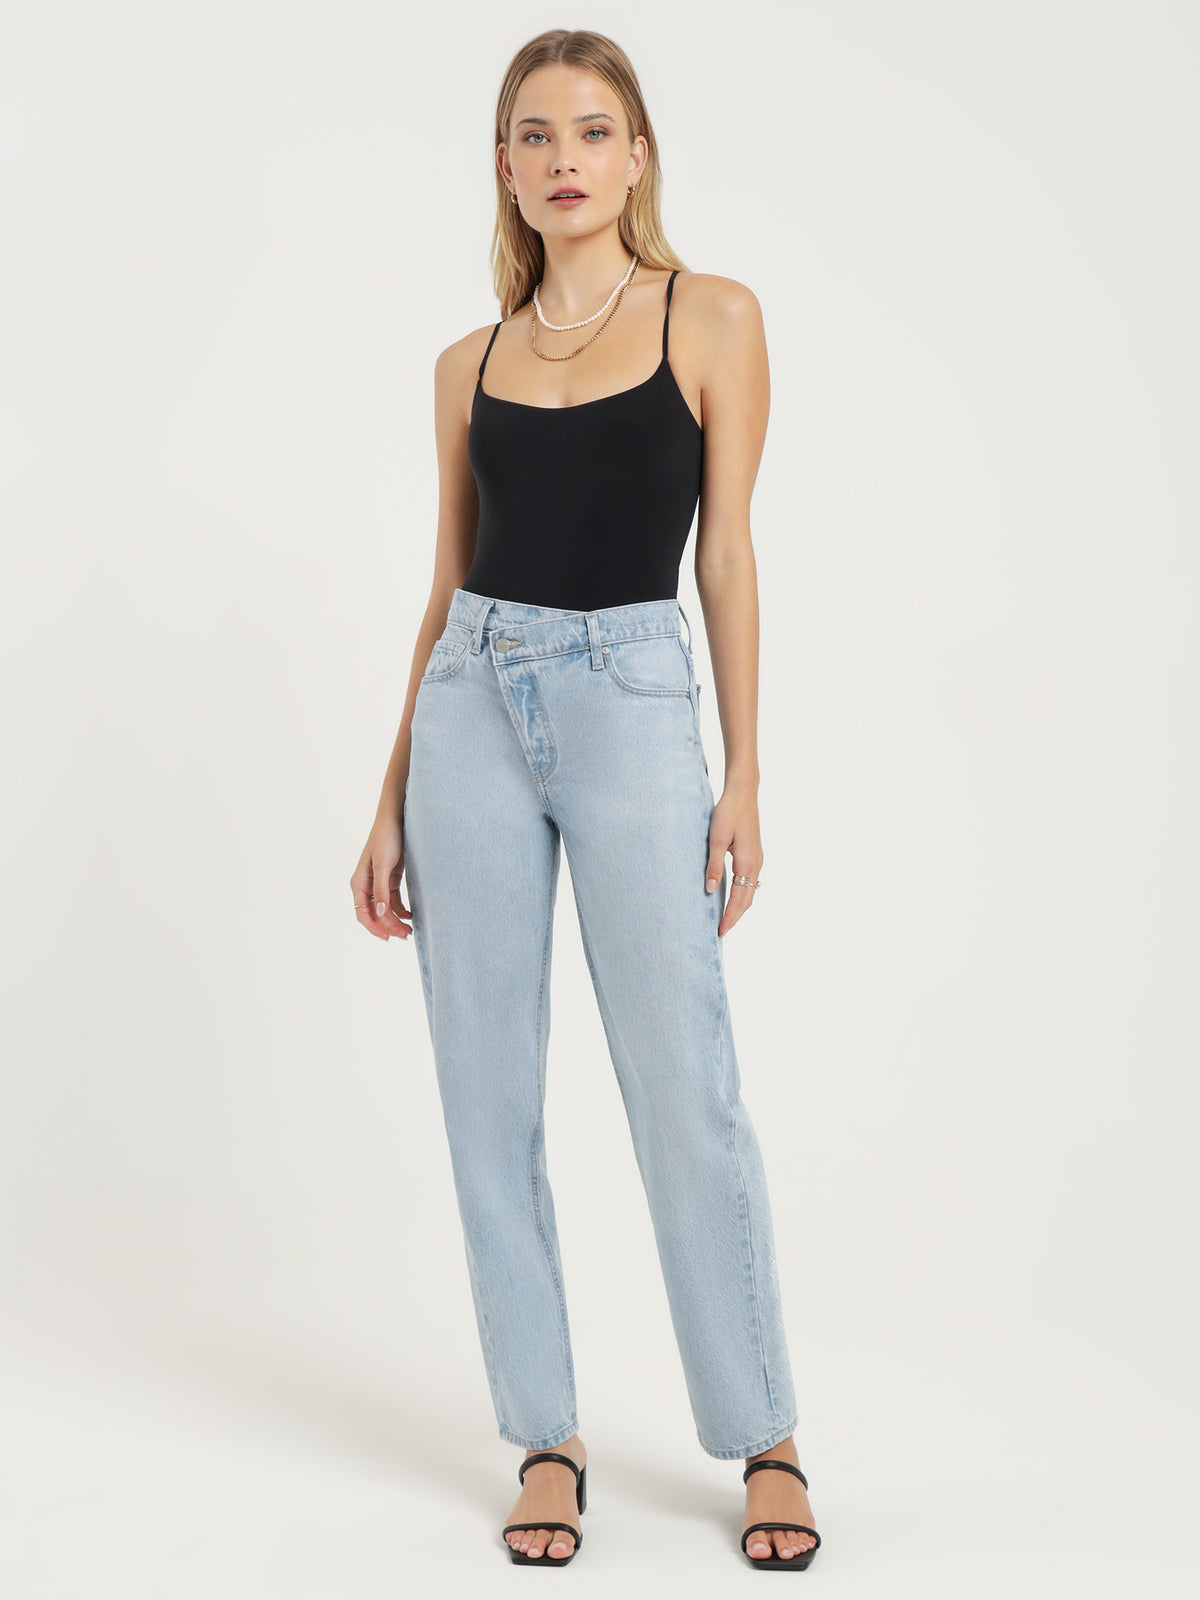 Maude Crossover Jeans in Dizzy Blue